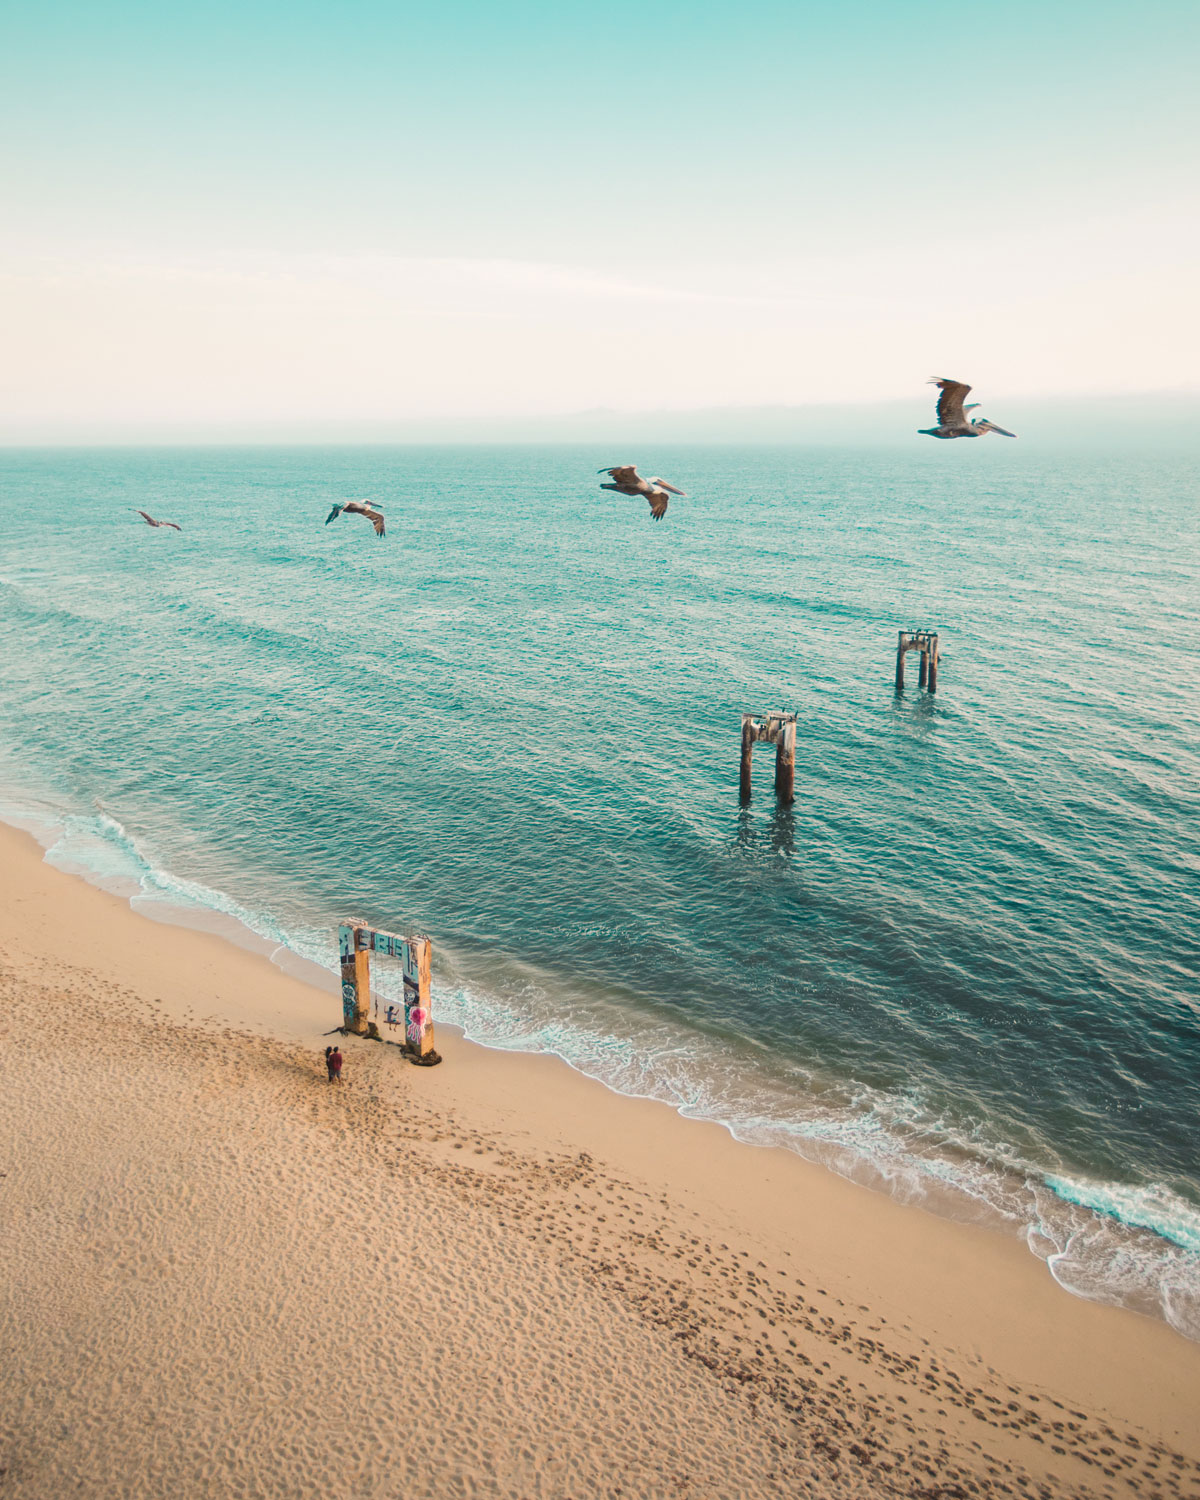 Pelicans flying over the remnants of a pier in Davenport, California